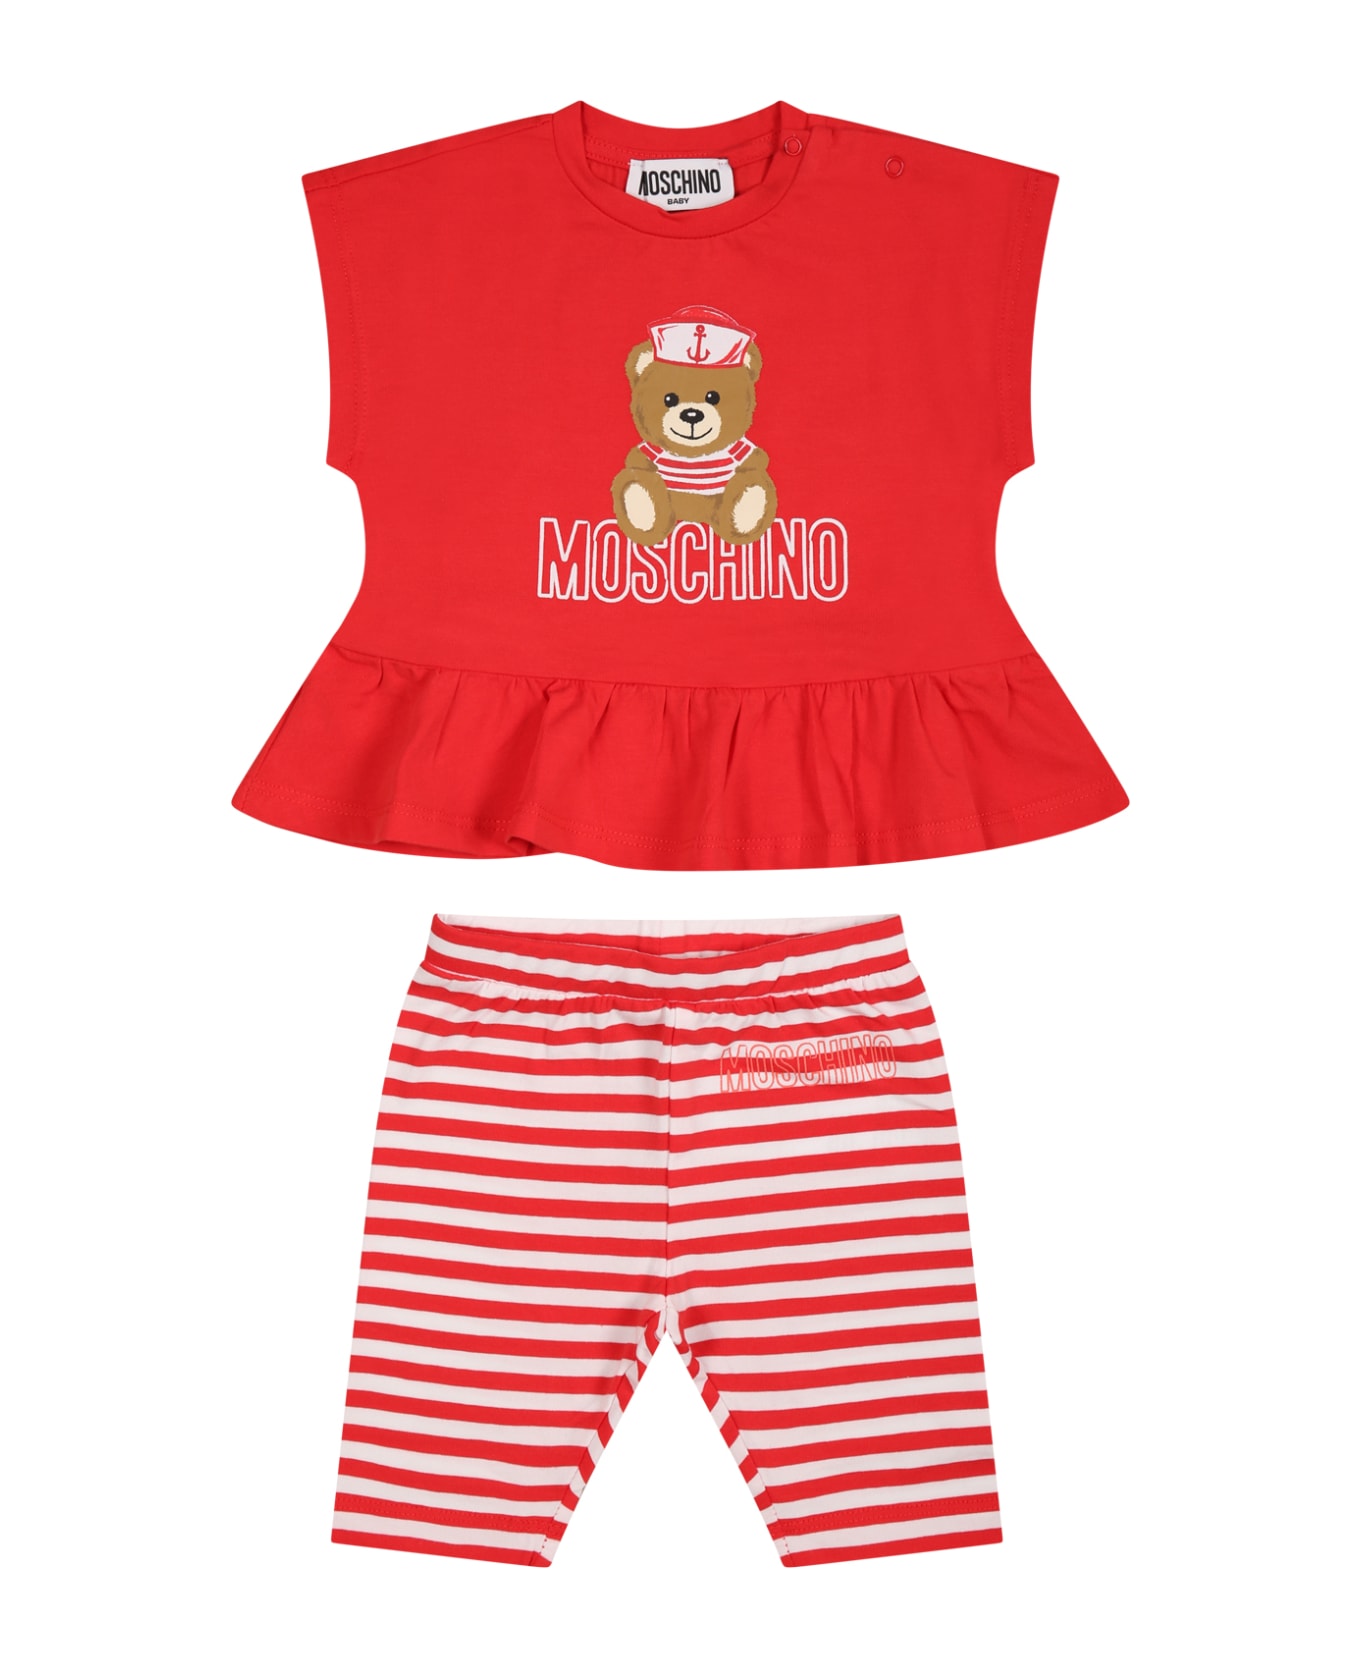 Moschino Red Suit For Baby Girl With Teddy Bear And Logo - Red